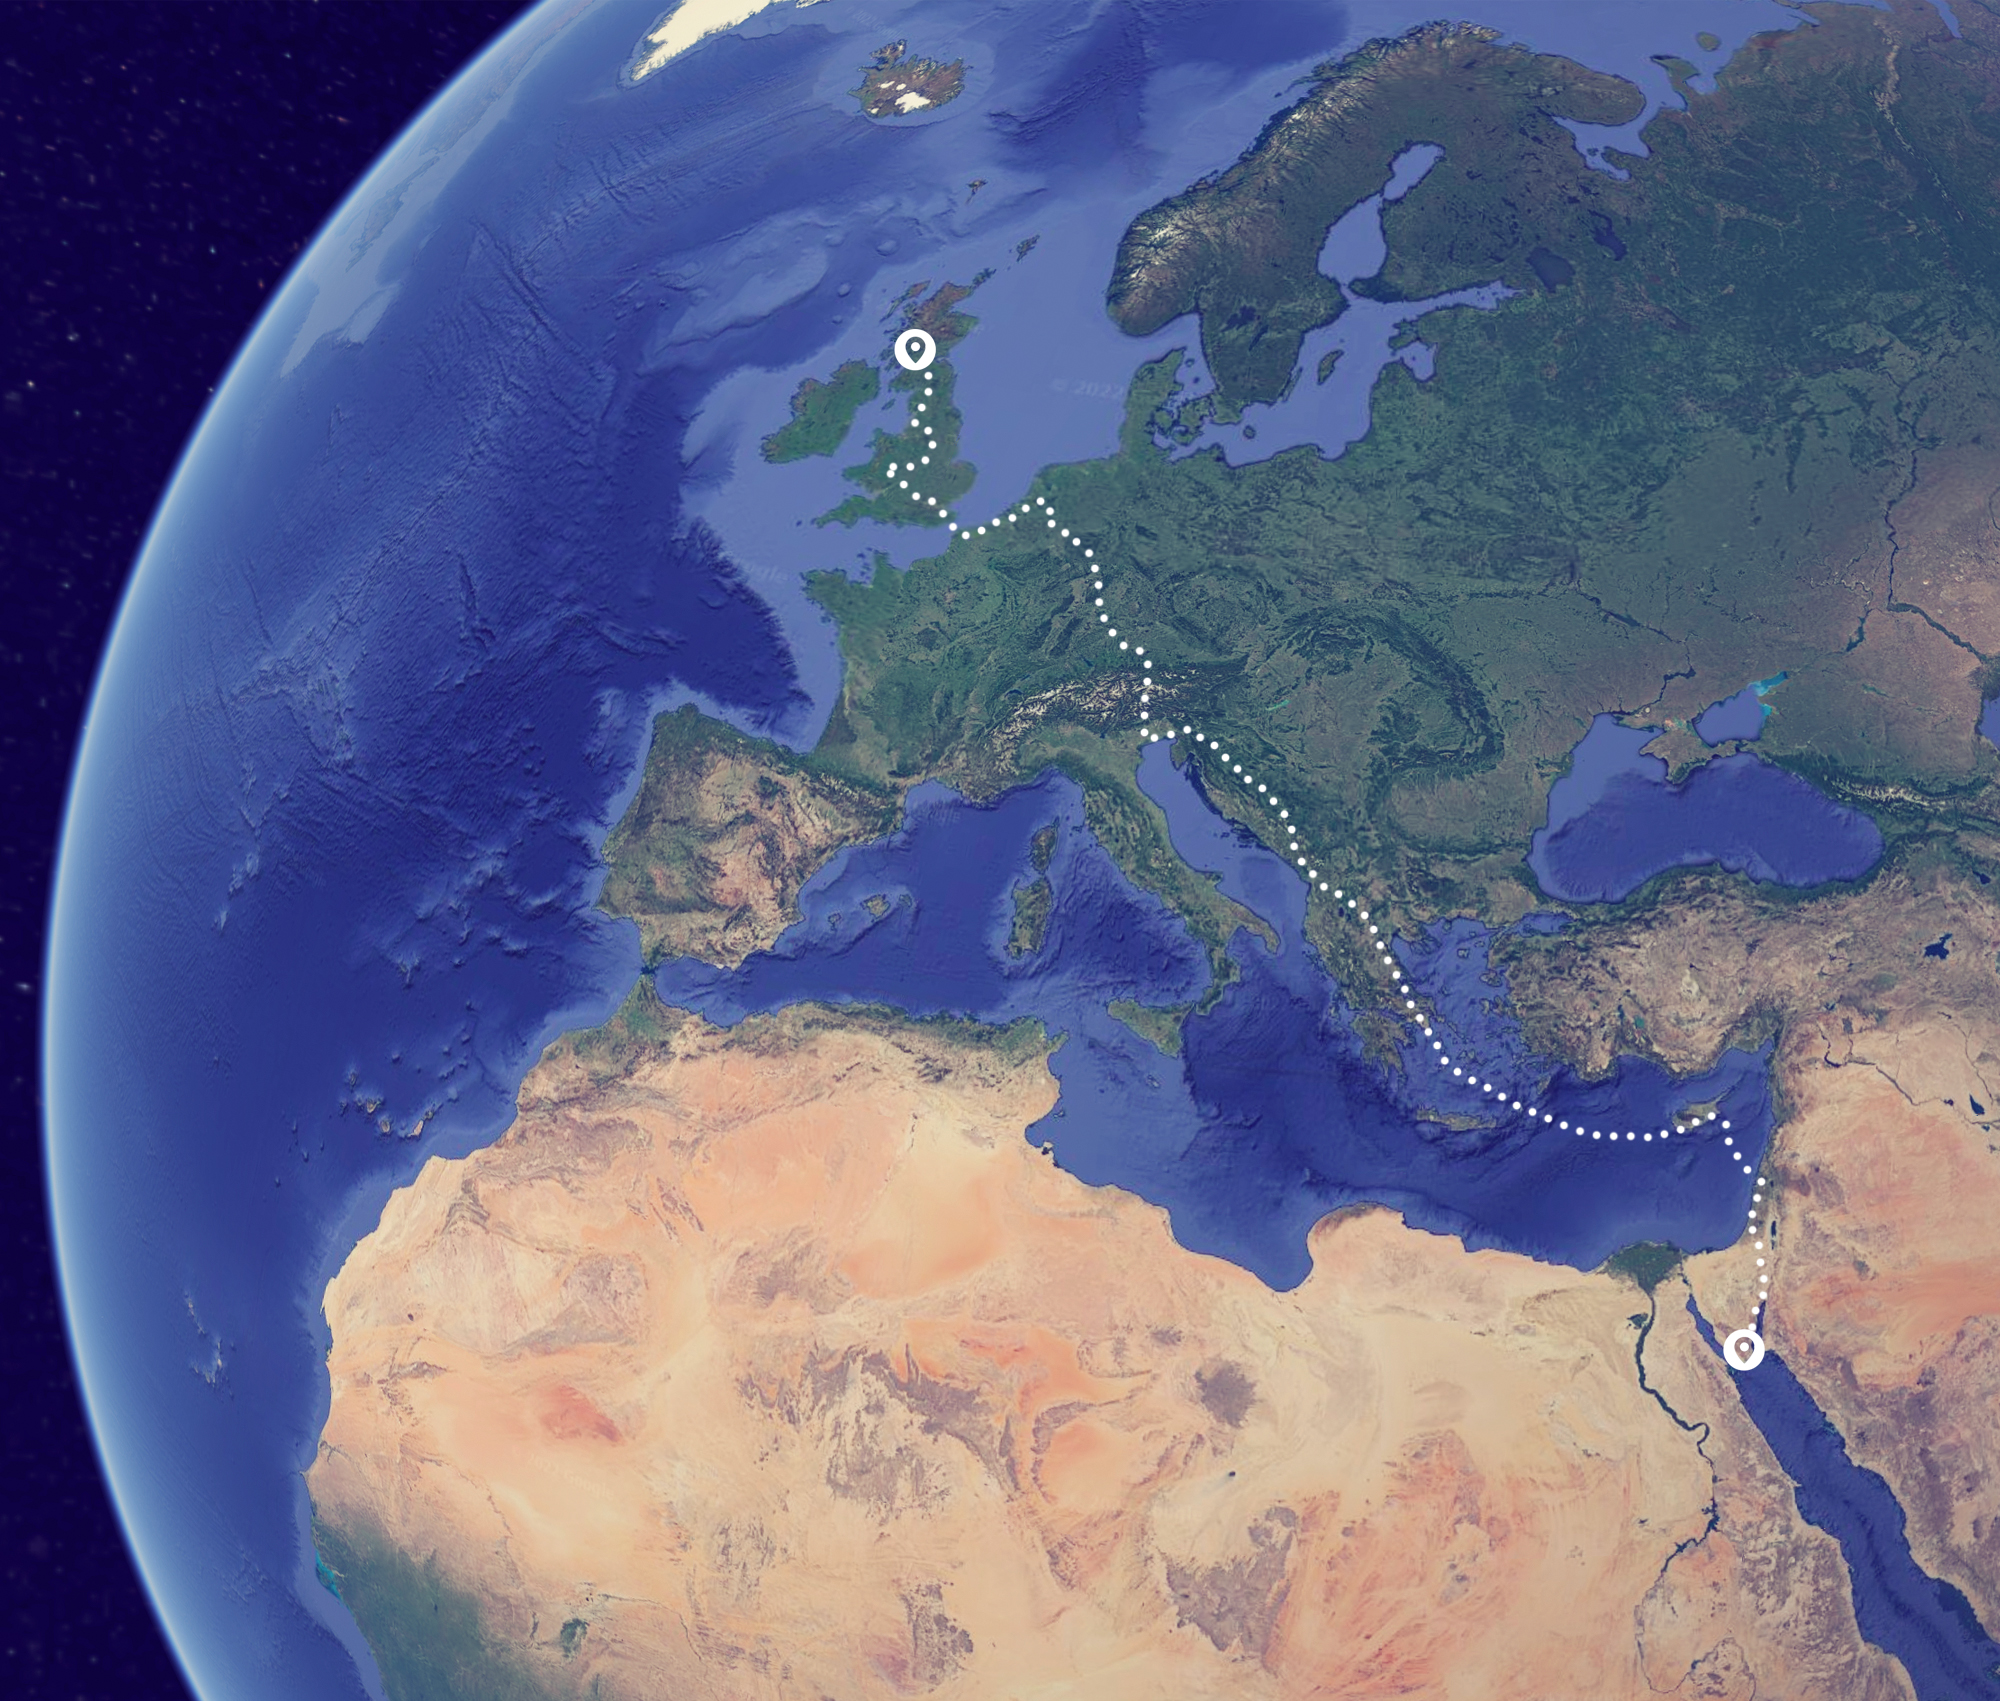 The Running Out of Time relay route from Glasgow to Sharm el-Sheikh in Egypt